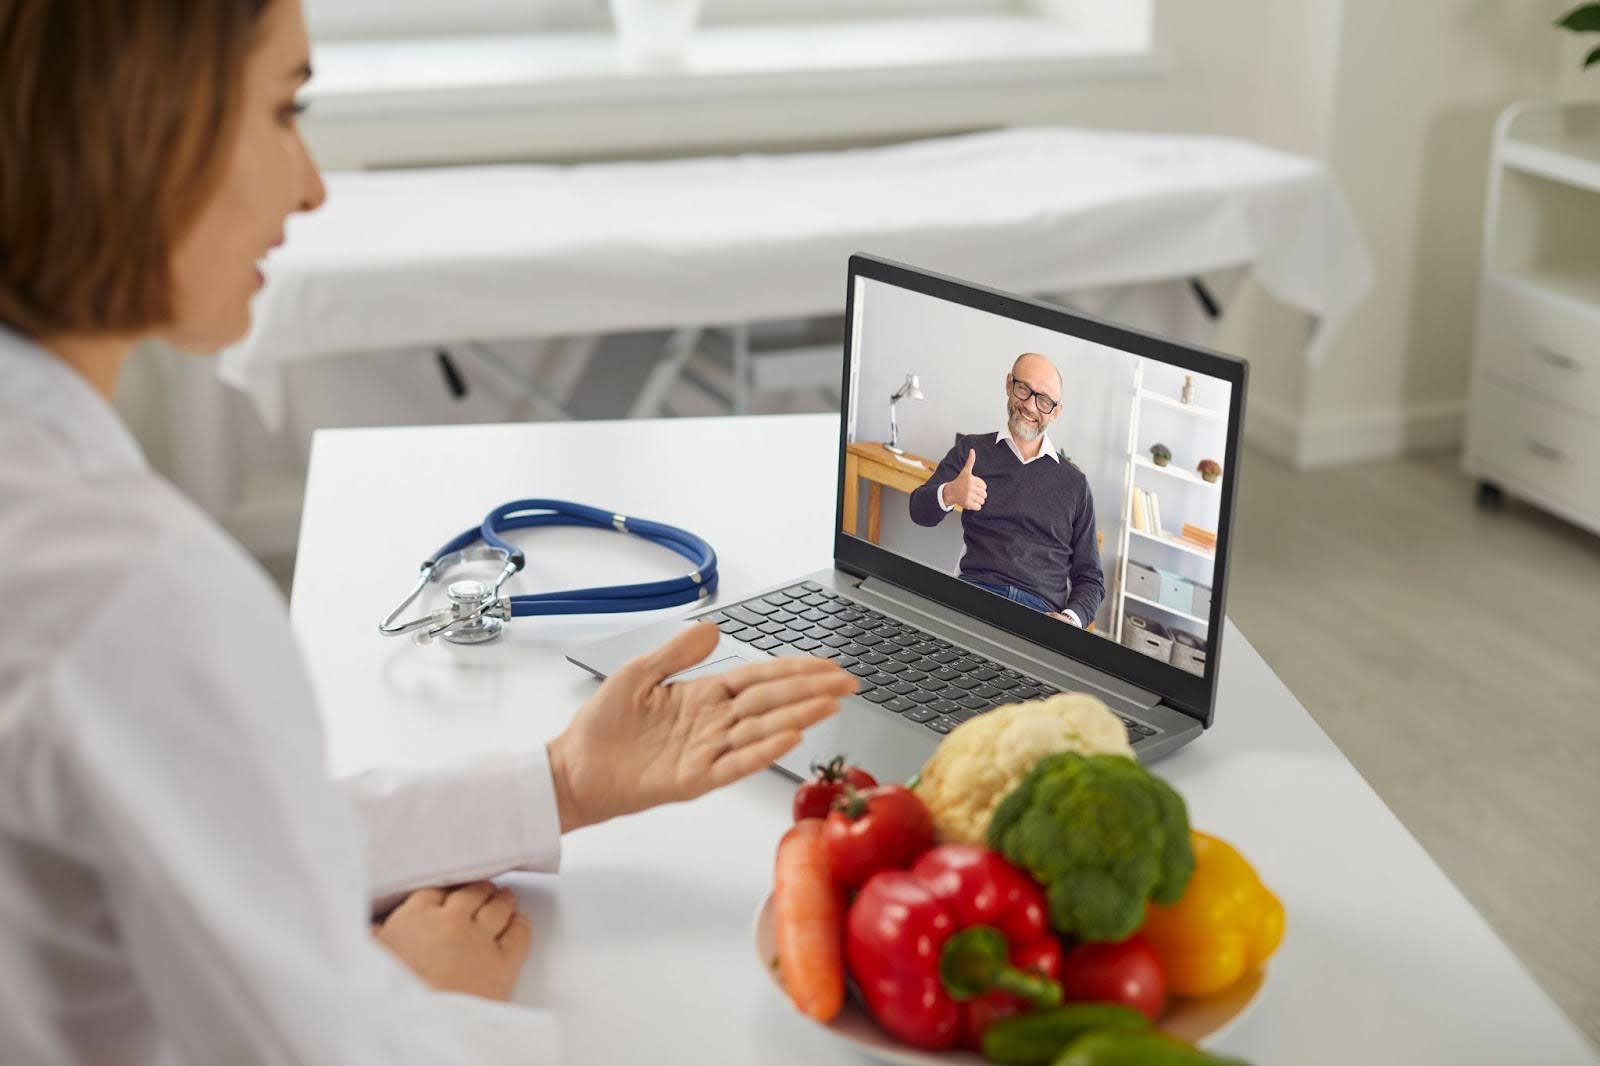 Female nutritionist trainer leading an online coaching session